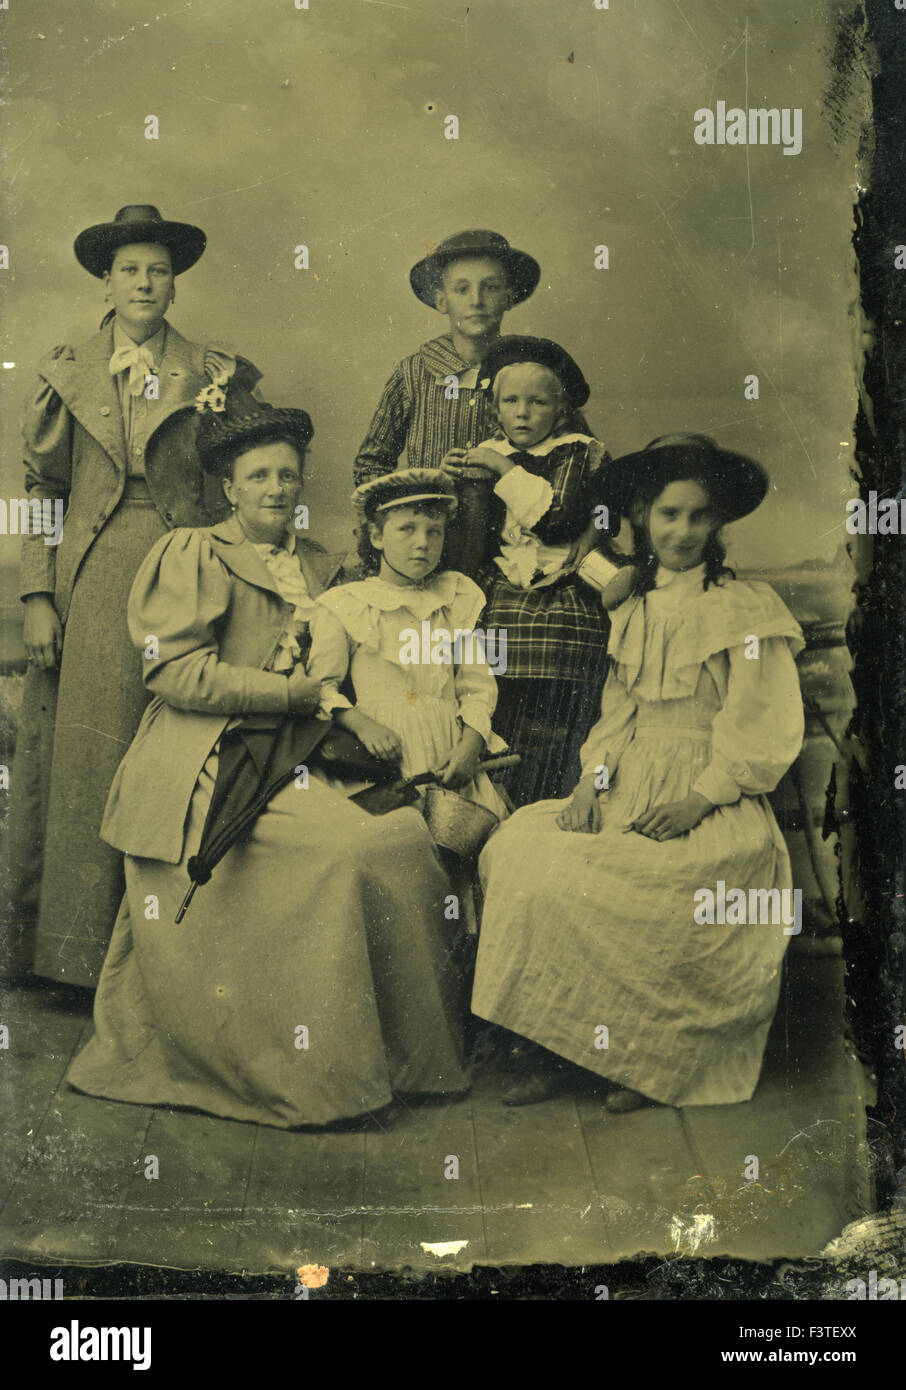 Family dressed in victorian style clothing and hats during a photo sitting that produced a tin-type photograph during the late 1800s in the United States of America. Stock Photo